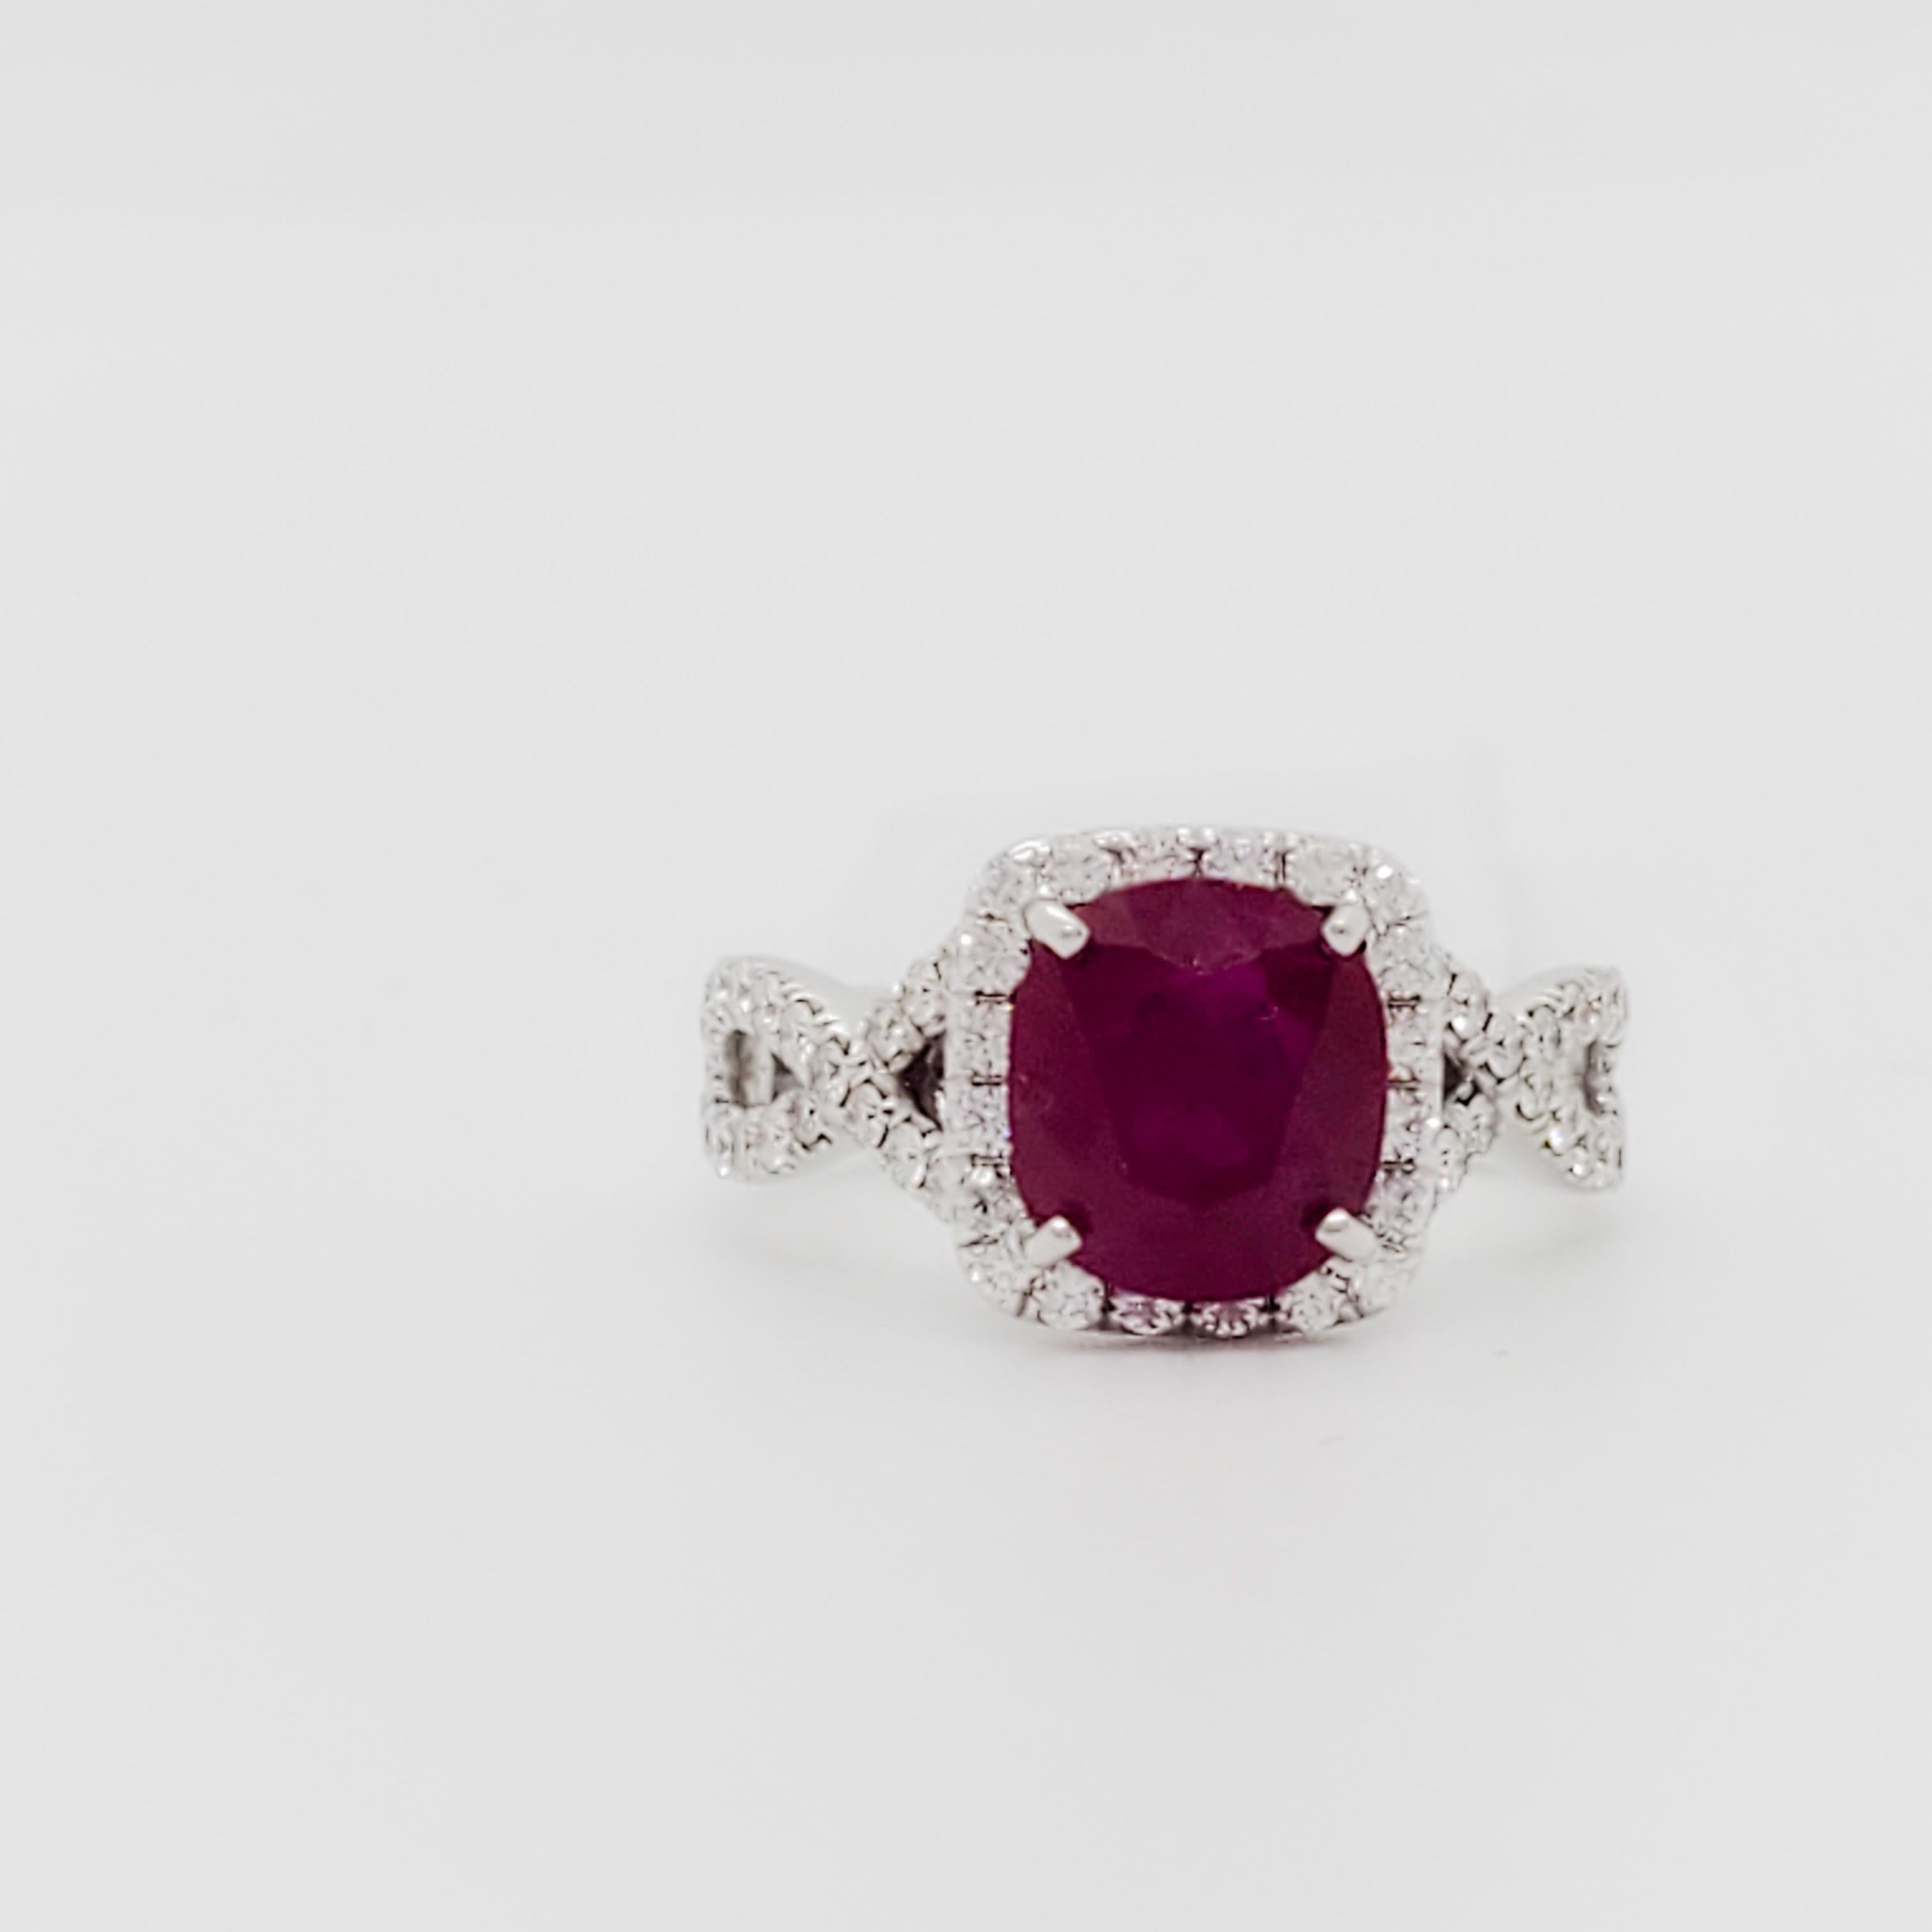 Gorgeous 2.15 ct. Burma ruby cushion with 0.50 ct. good quality white diamond rounds.  Handmade in 18k white gold.  Ring size is 4.75.  The braided pave band adds a very feminine touch to the ring. 
GIA certificate is included.